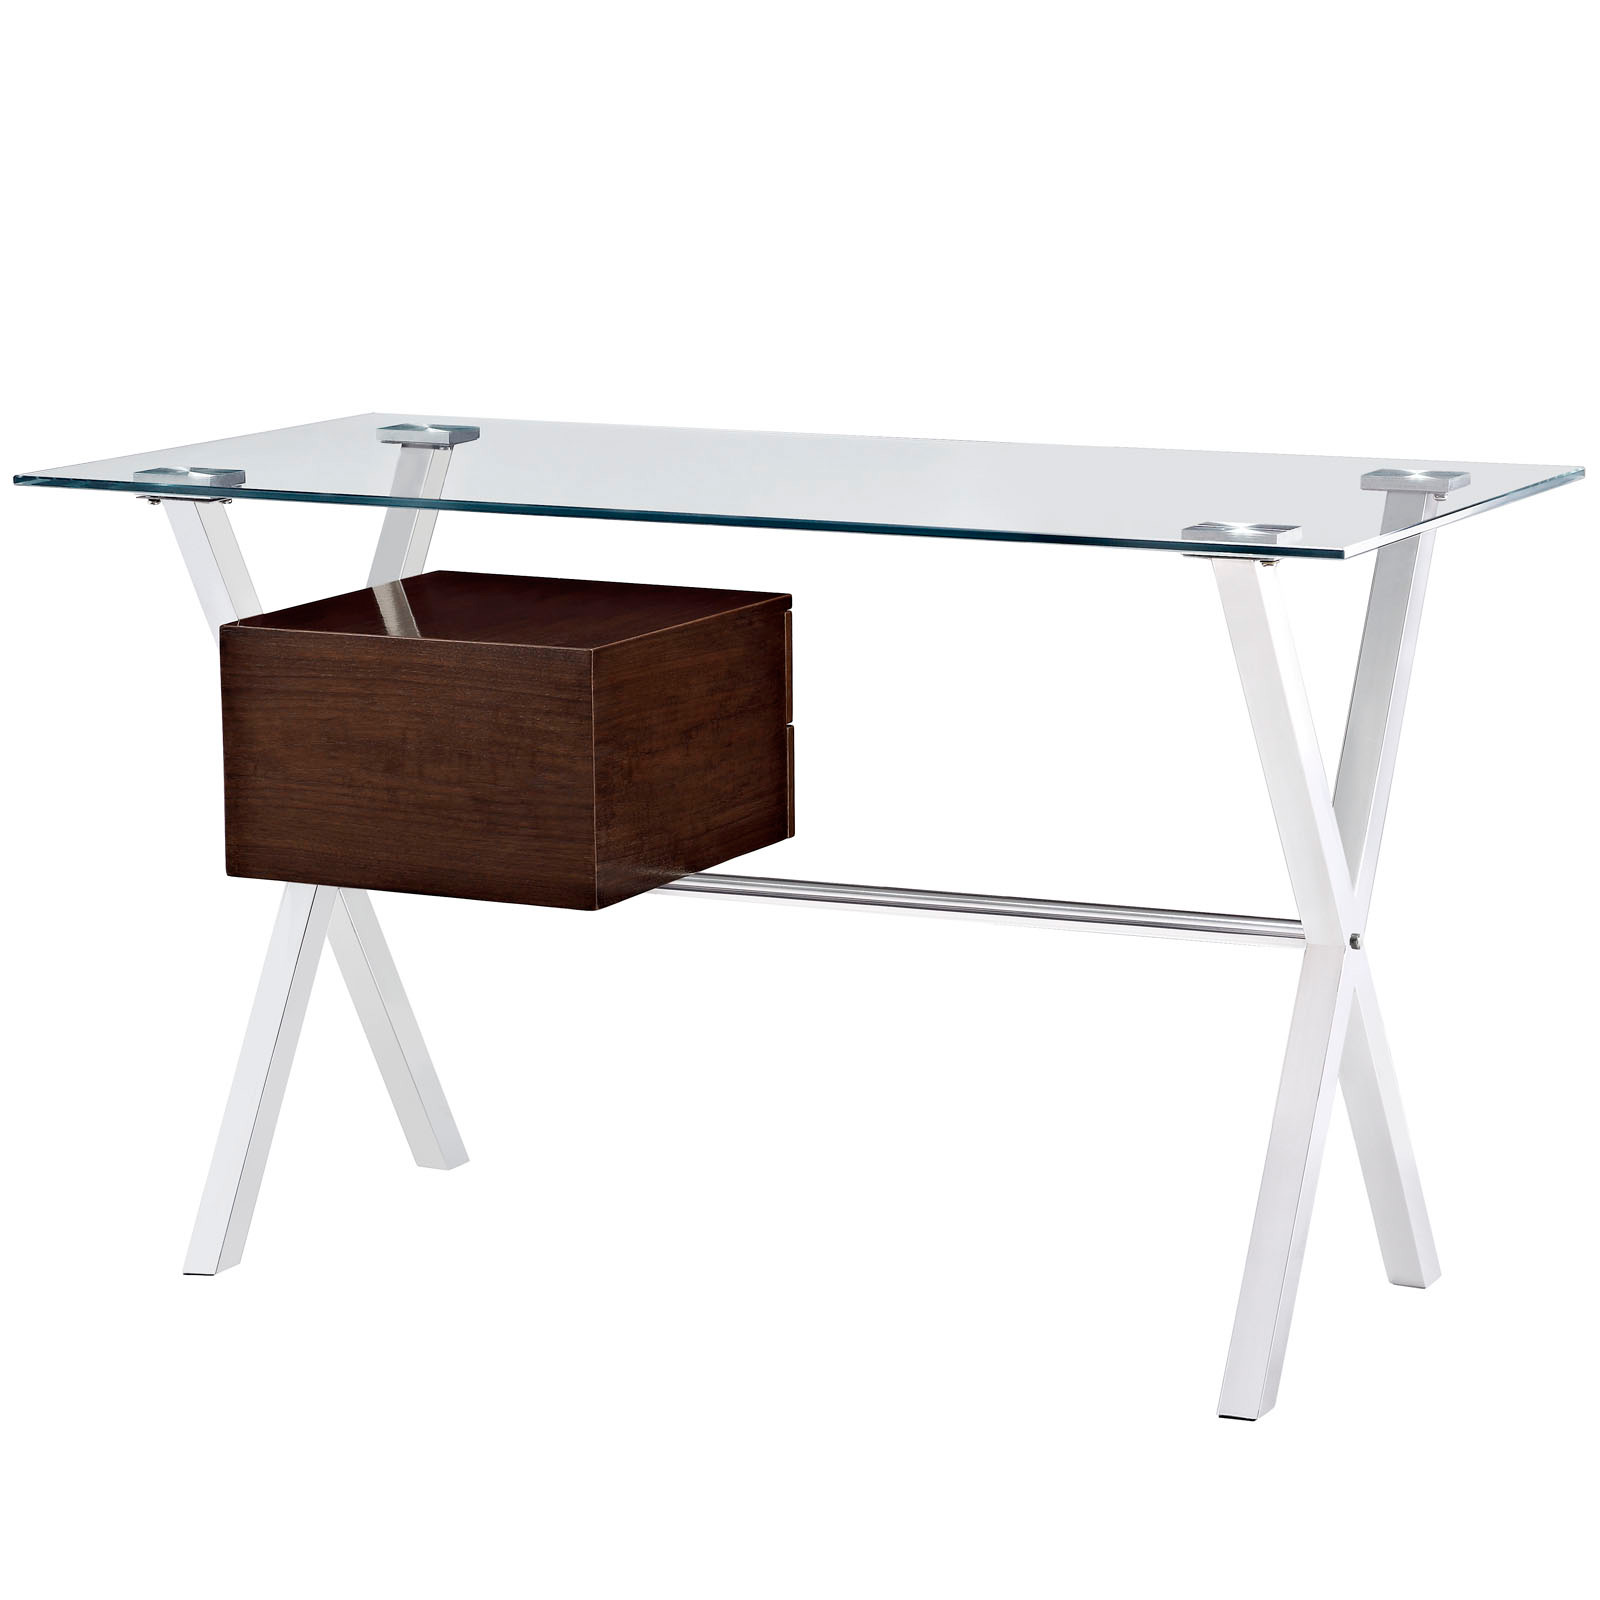 Space saving desk from Modway - Back View - Shown in Walnut (Brown)